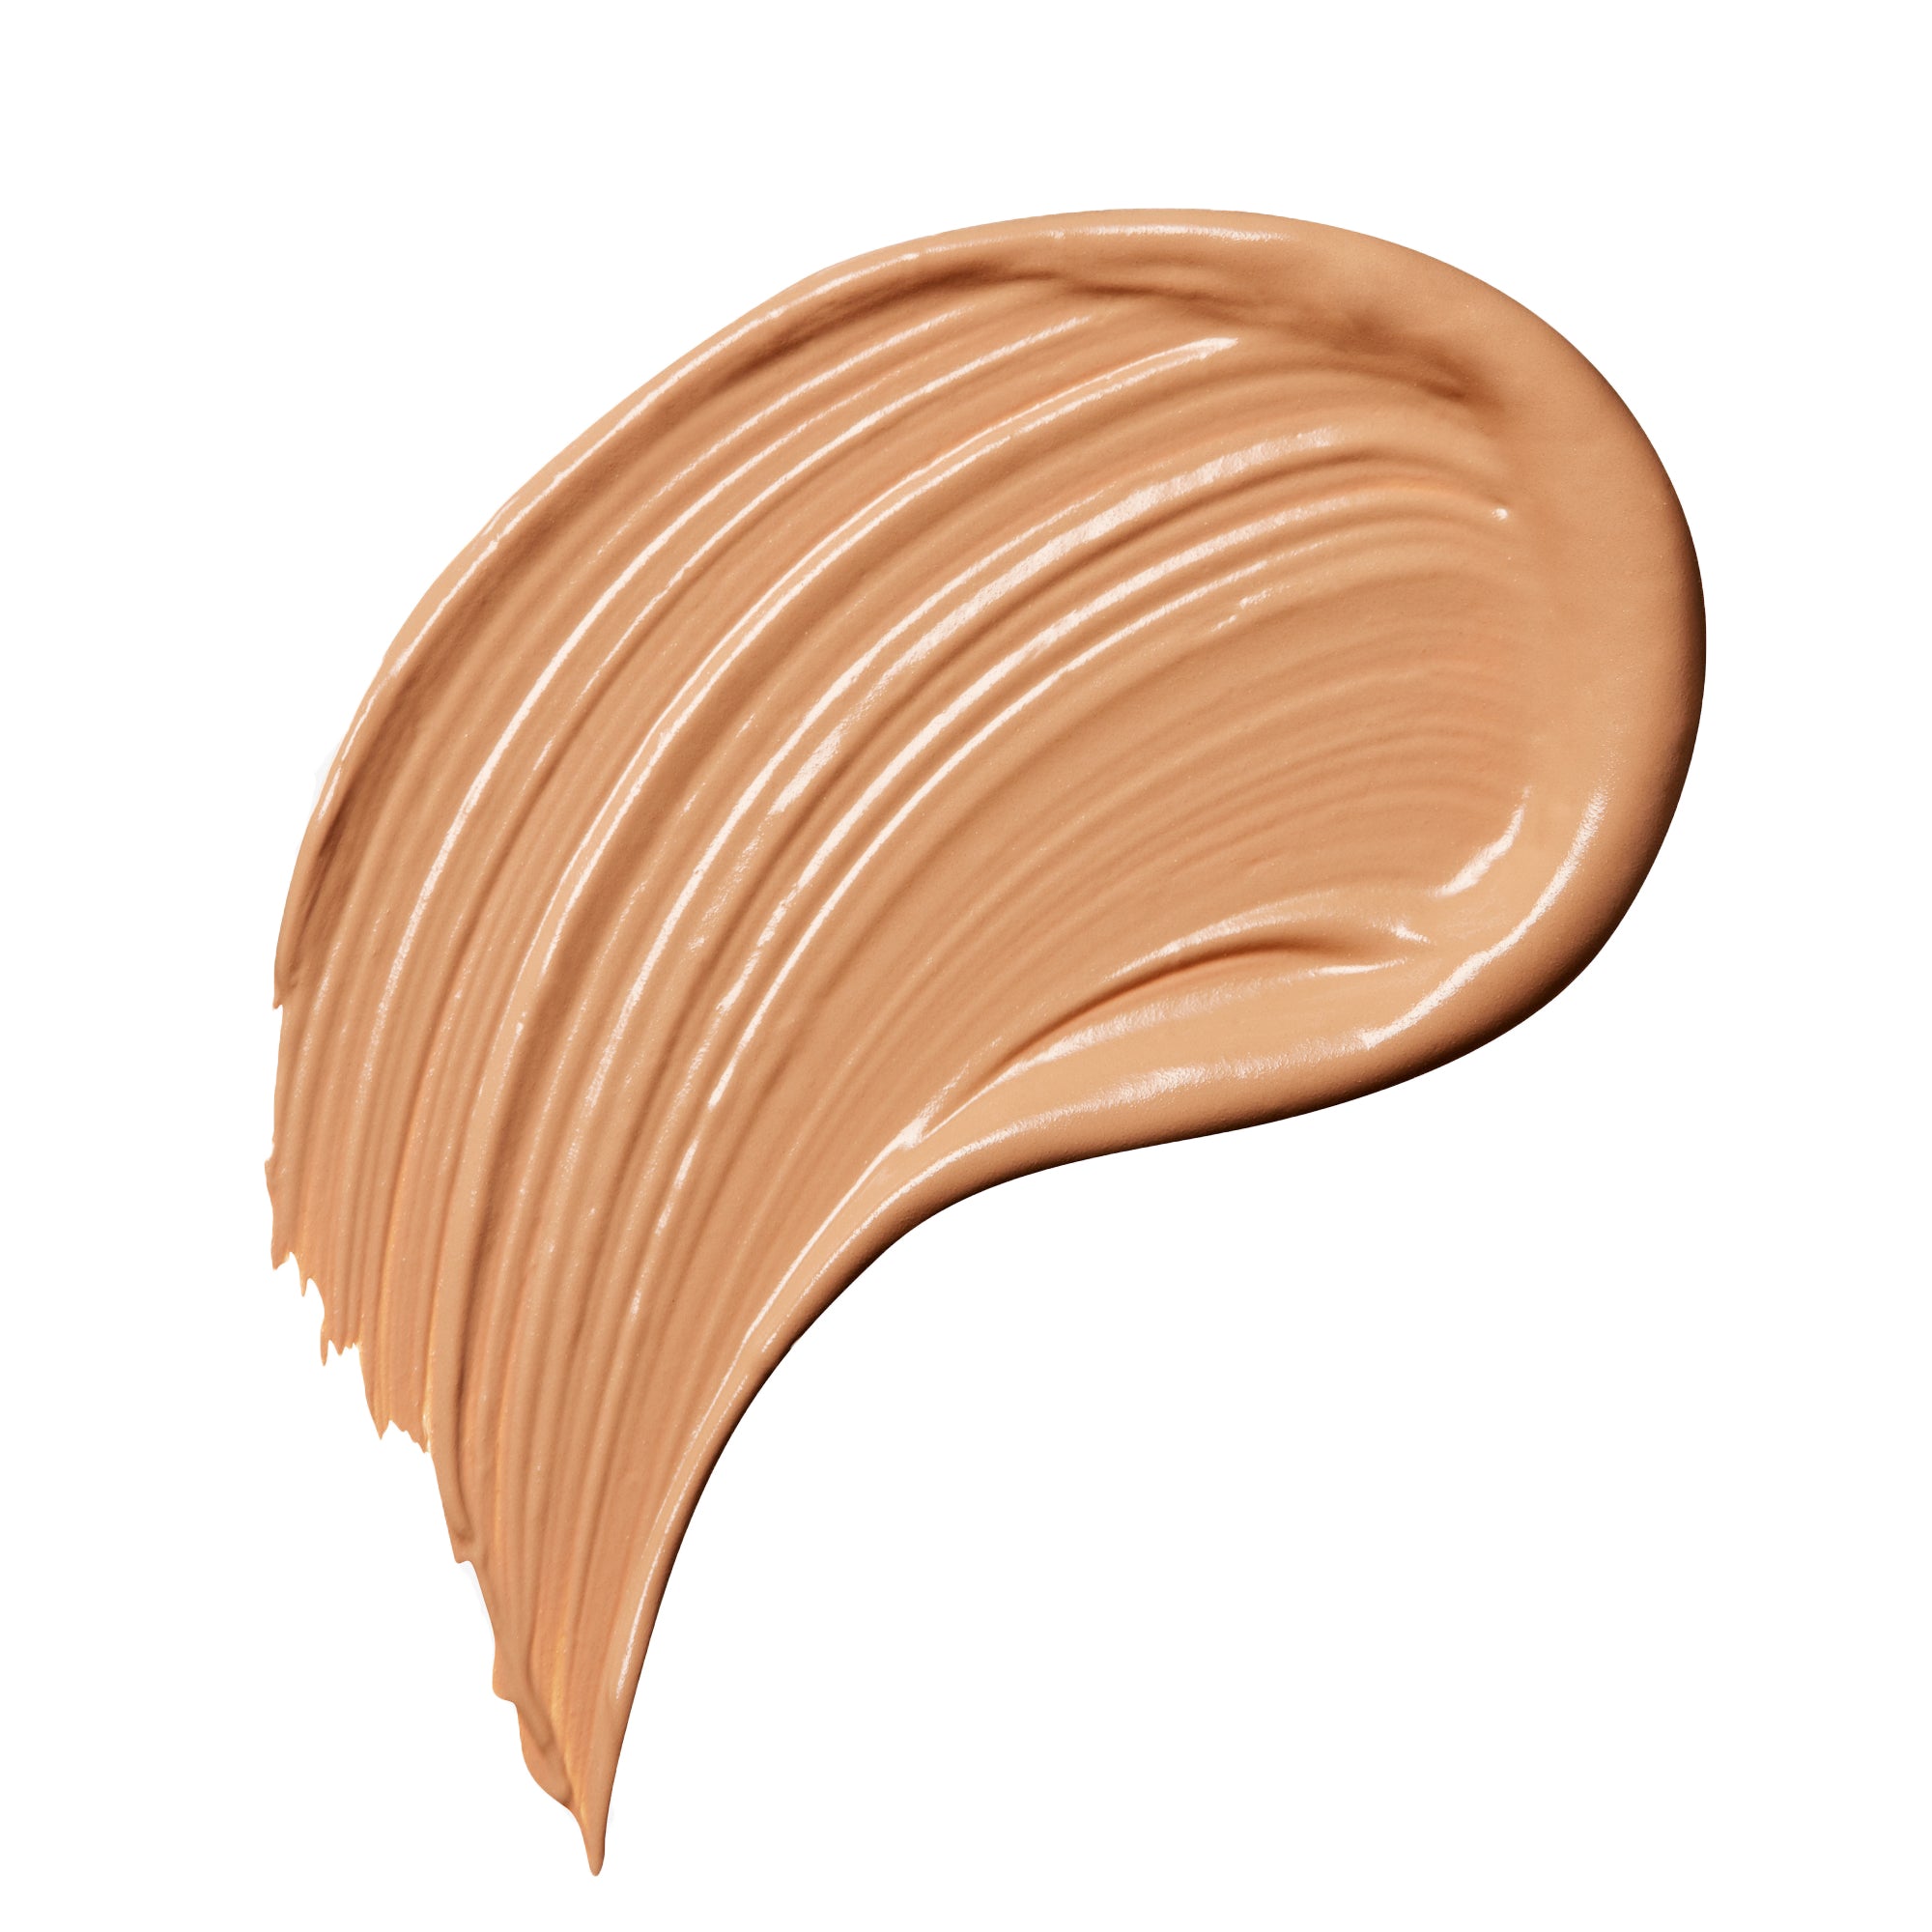 Rodial Glass Concealer / Shade 05 / Swatch